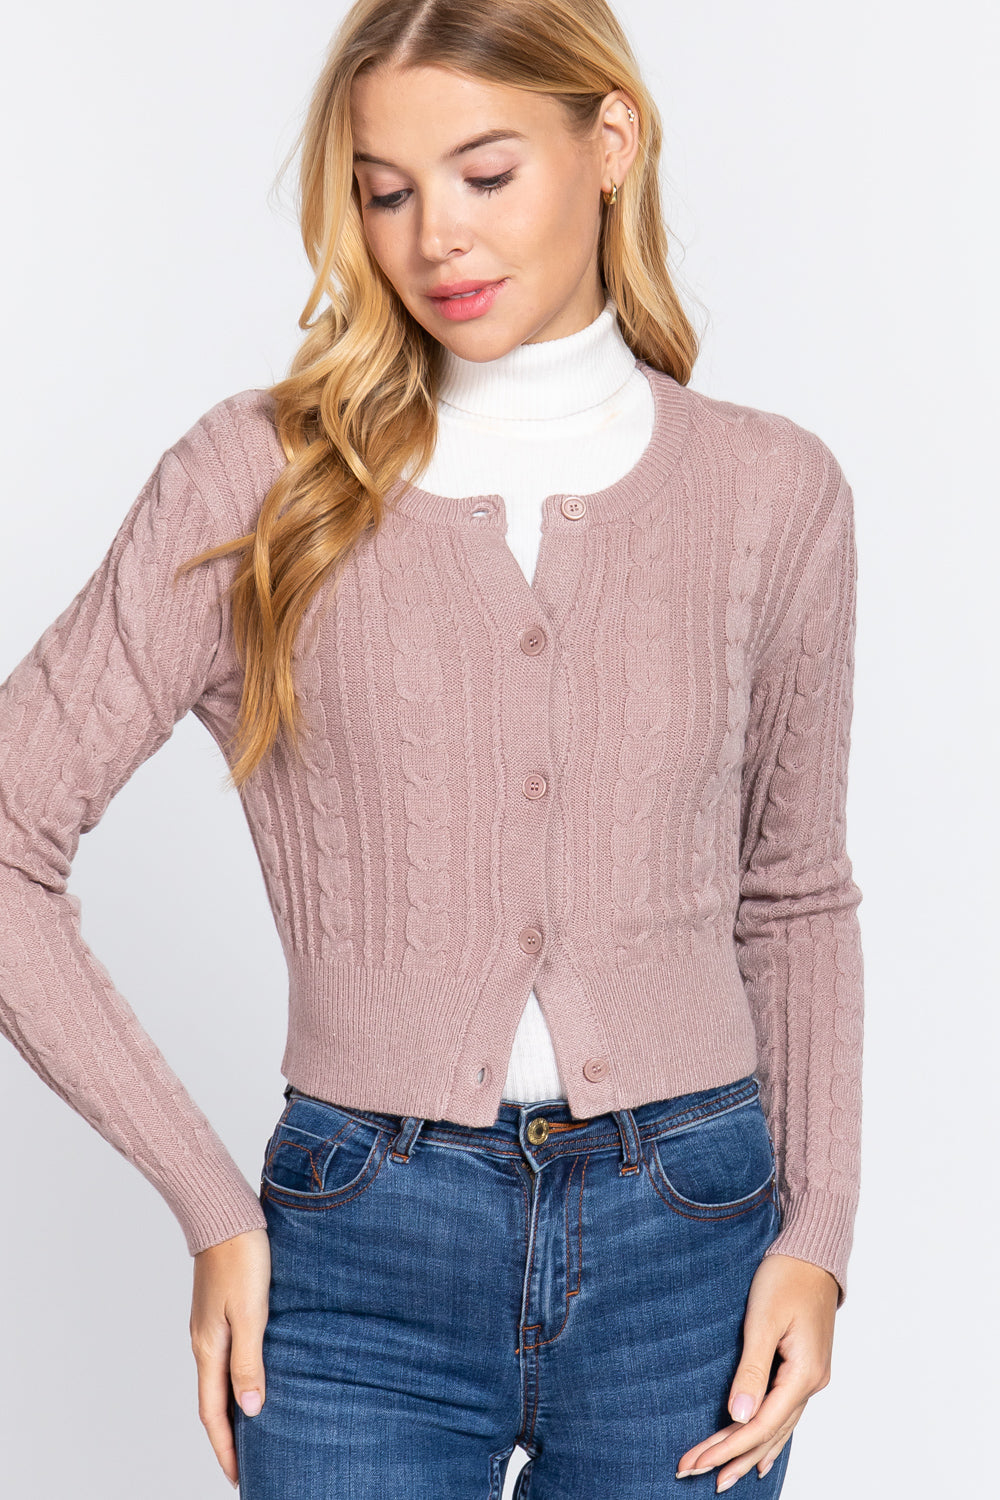 Crew Neck Cable Sweater Cardigan-57027.S-Select Size: S, M, L-Love It Clothing